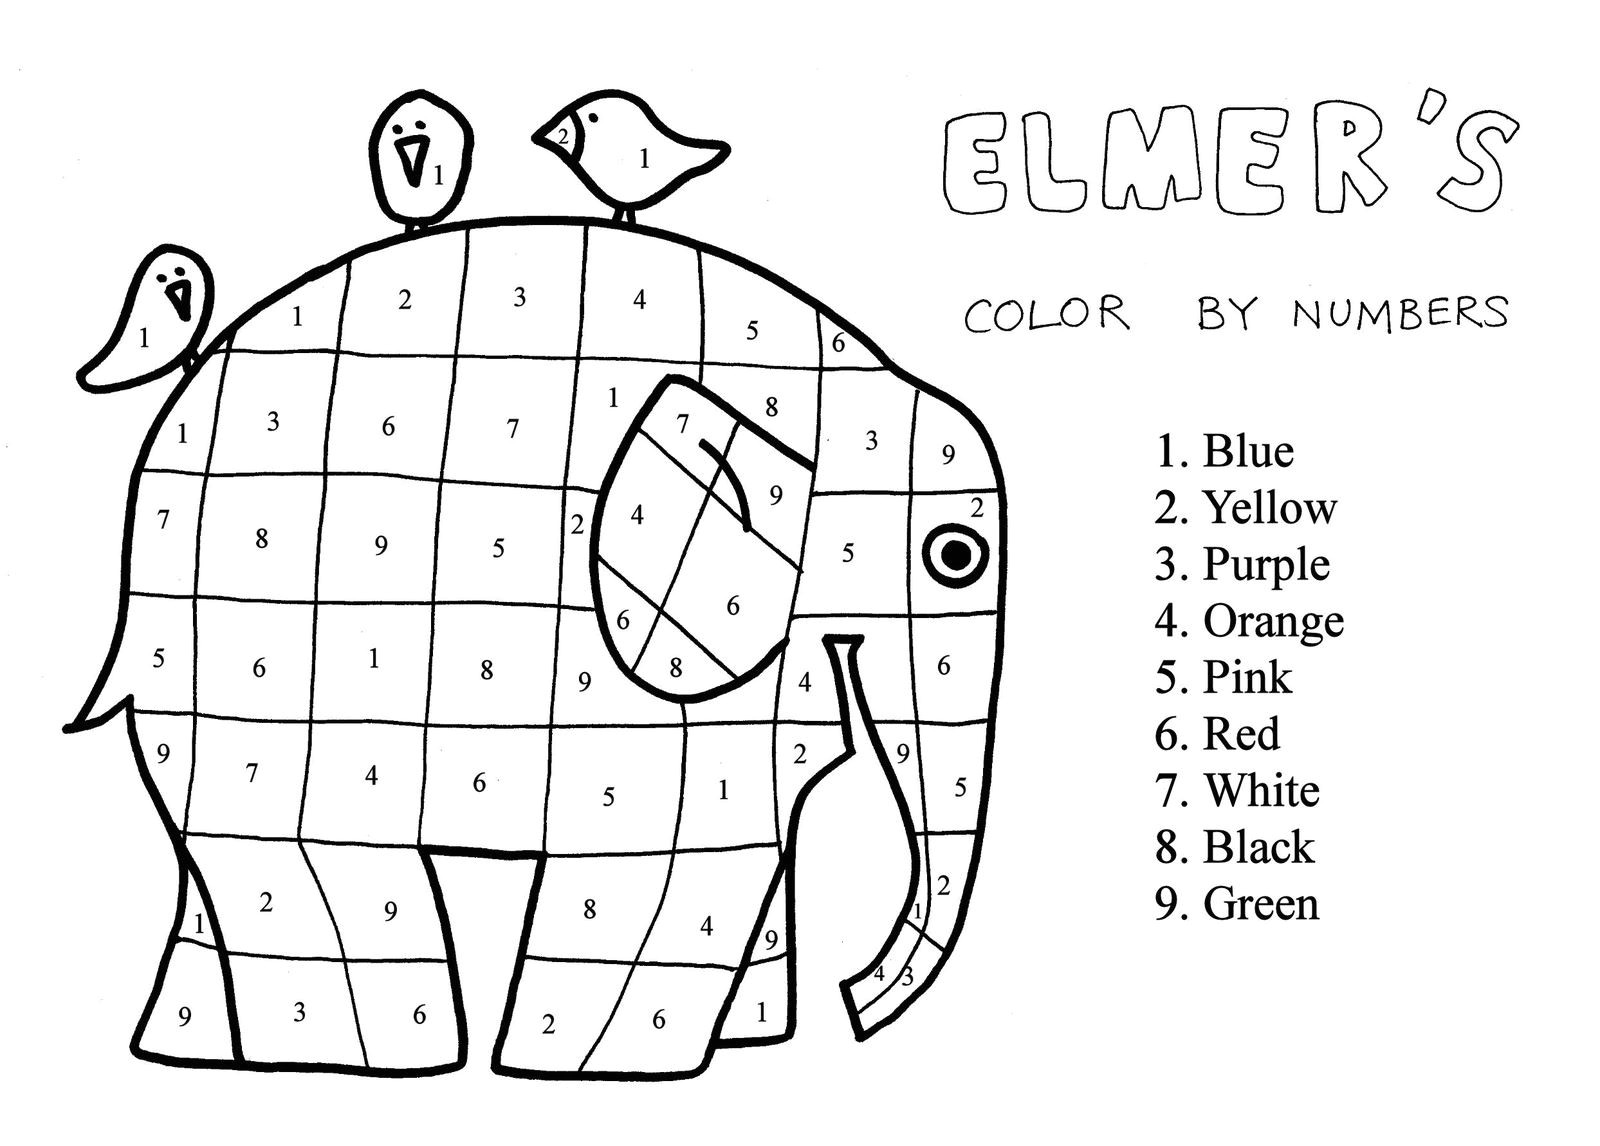 ELMER S COLOR BY NUMBERS image